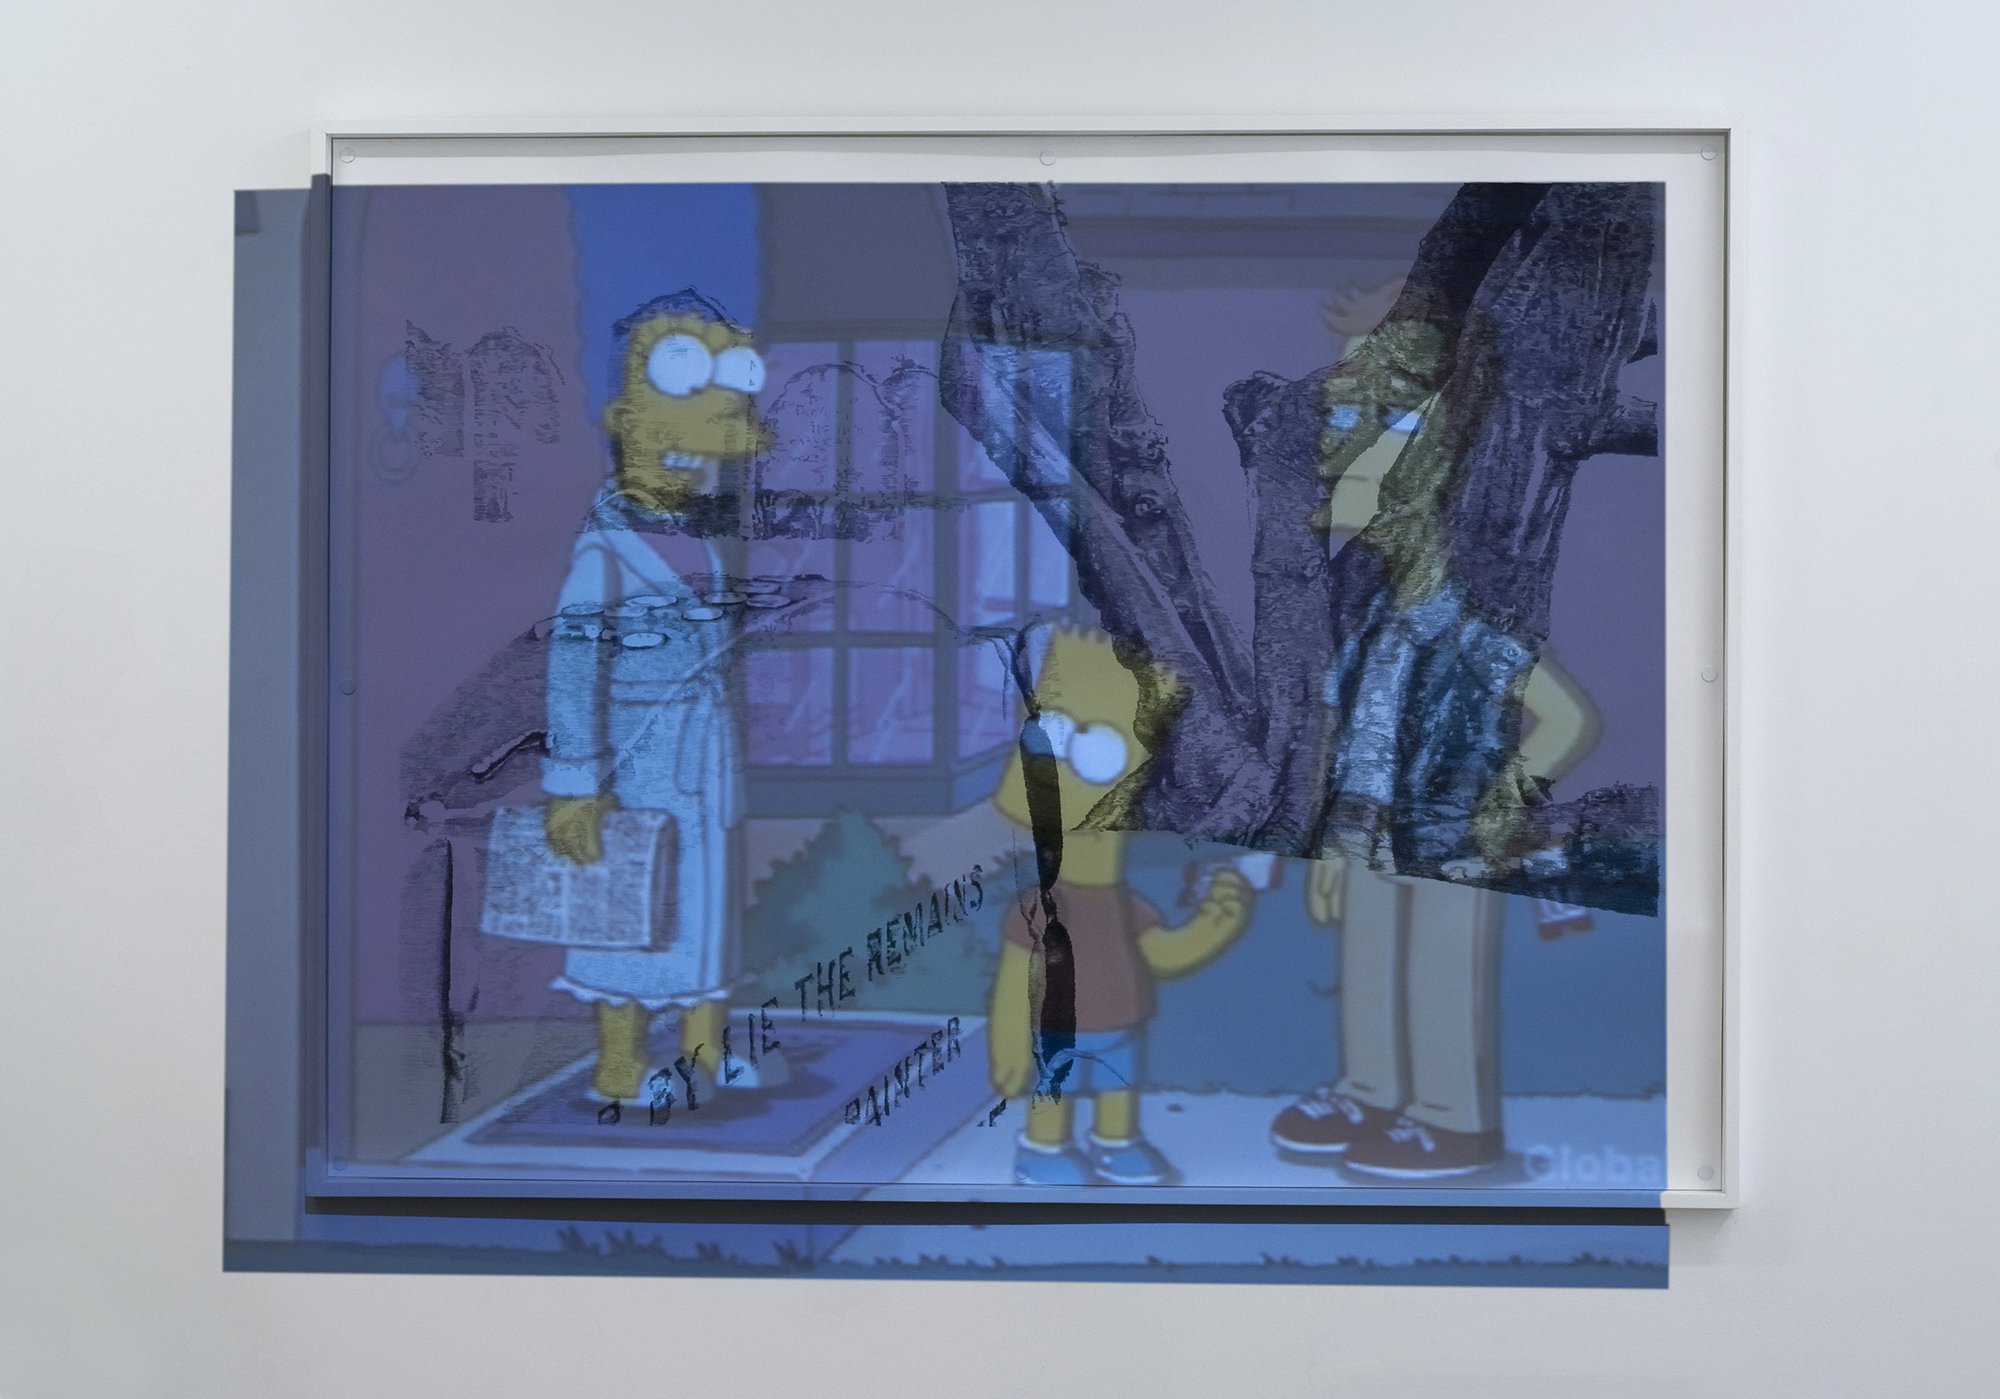 Mark Aerial Waller, Offering Transmissions #1, graphite on paper, projection of recent episode of The Simpsons, 191 x 143 cm (75 1/4 x 56 1/4 in), 2011 – 2012